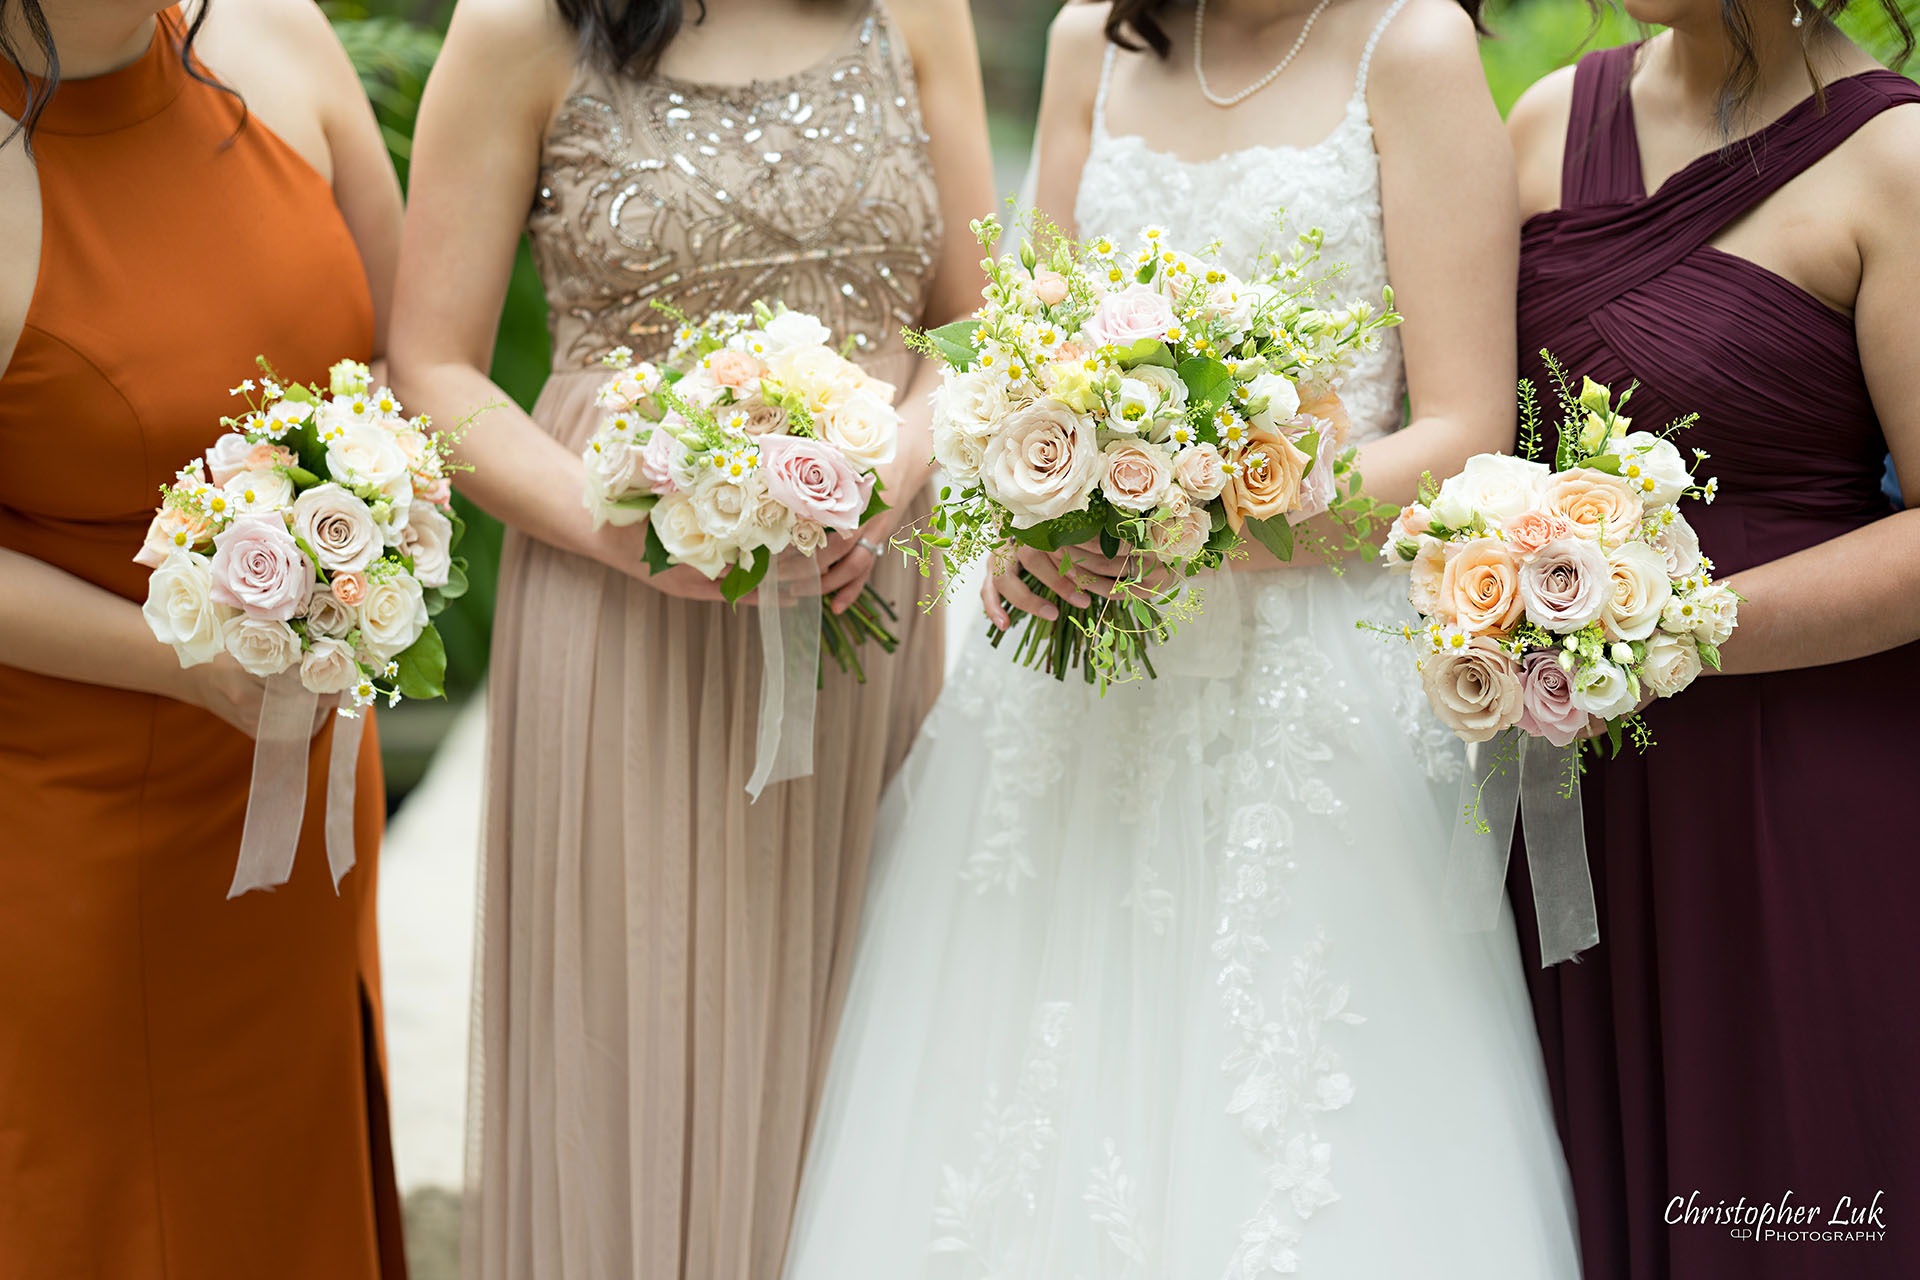 Wedding Party Bride Bridesmaids Candid Natural Photojournalistic Organic Floral Bouquet Flowers 